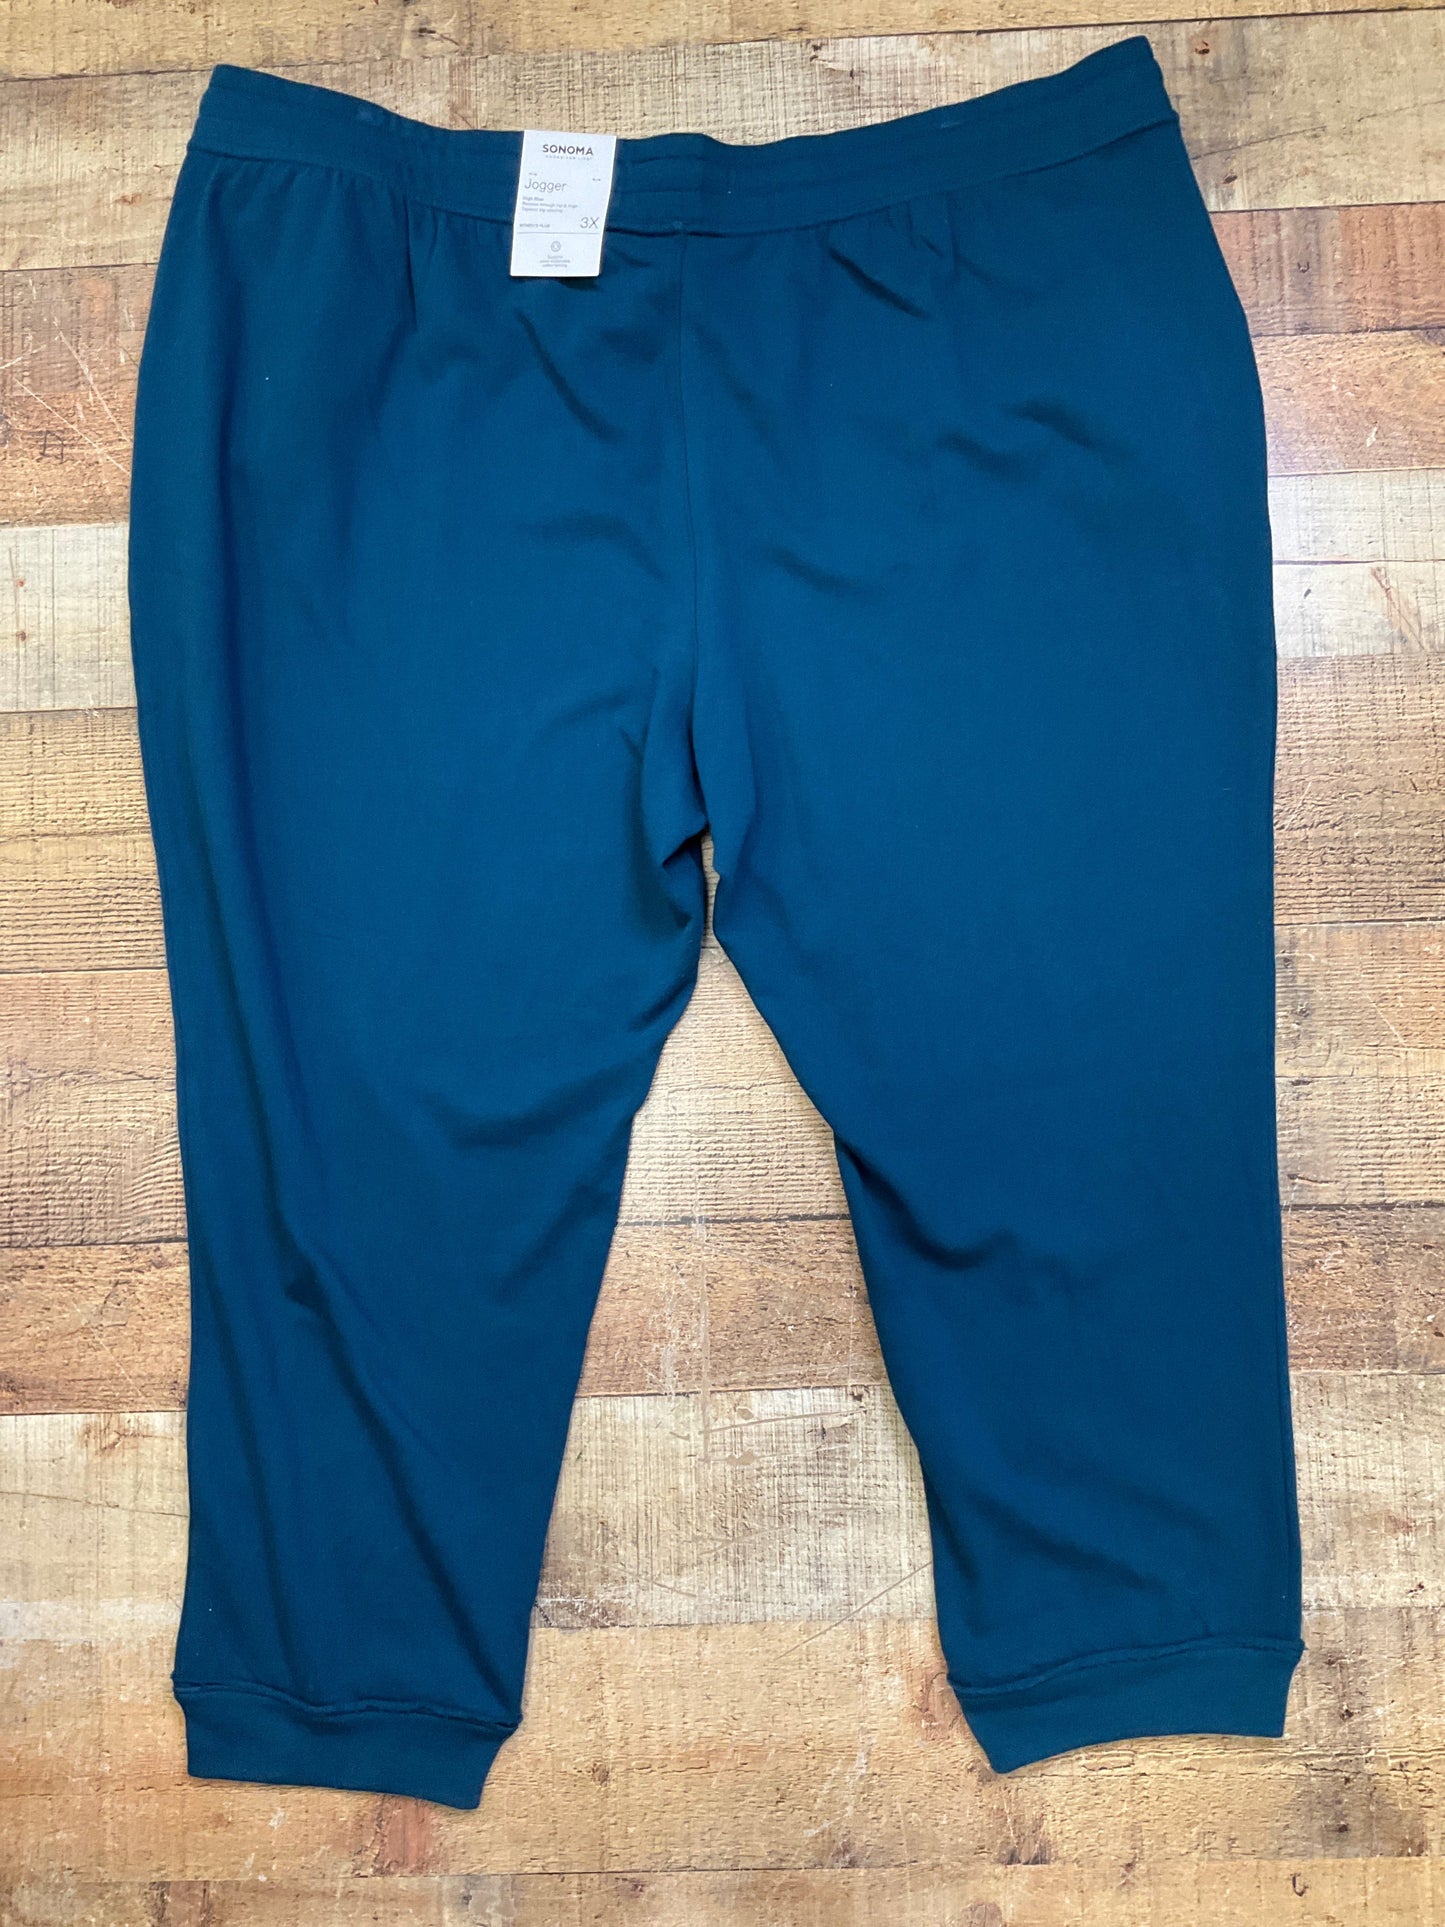 Pants Joggers By Sonoma  Size: 3x